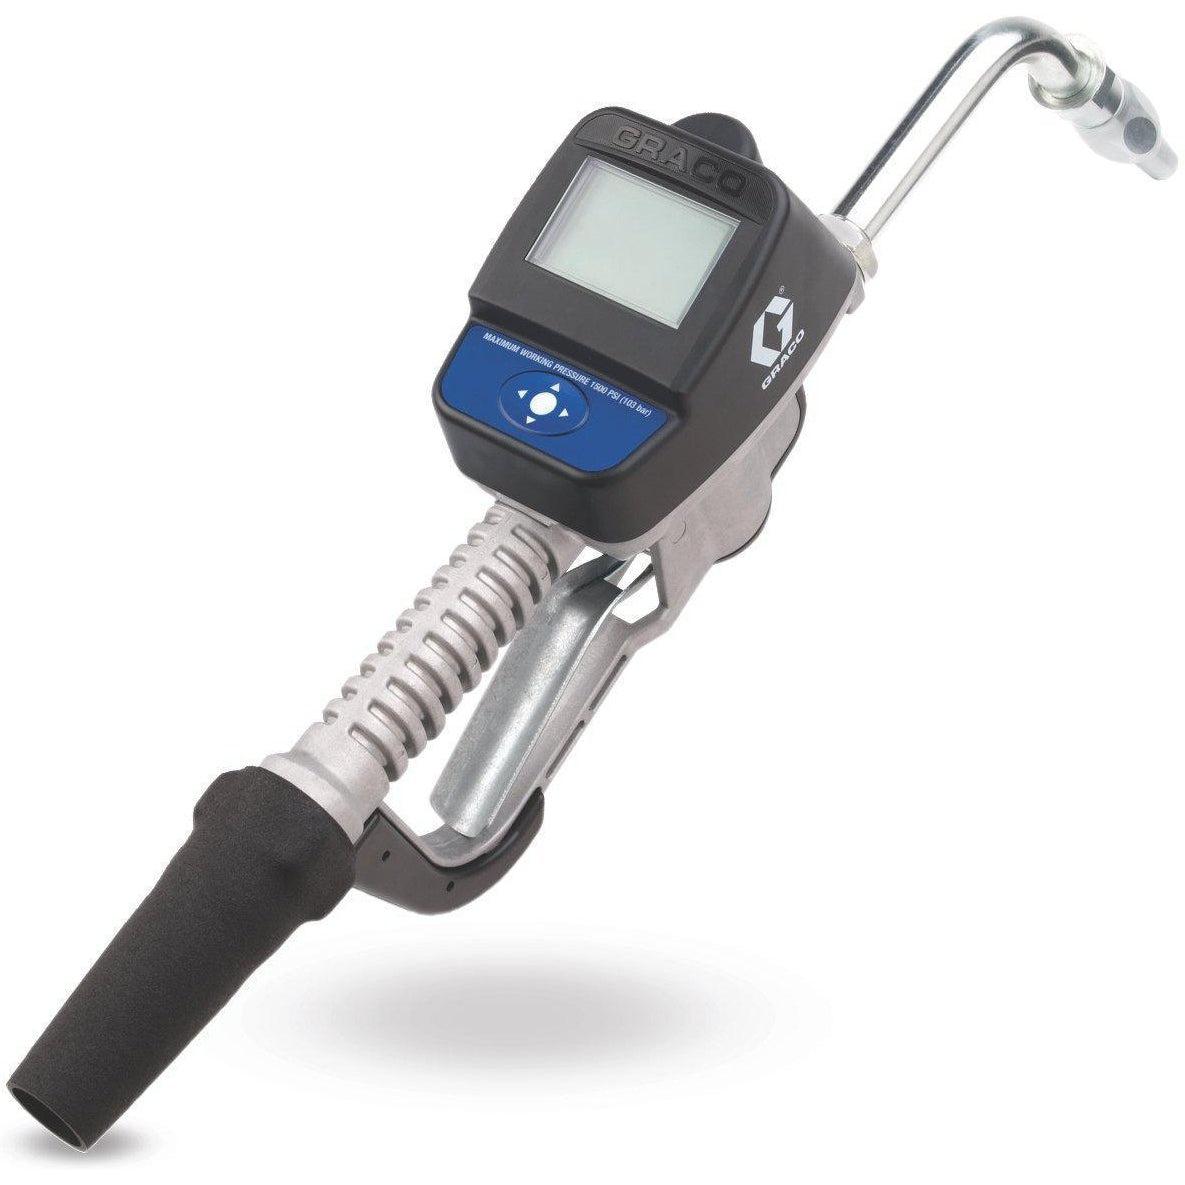 24H130-Graco 24H130 Sdm5 Series Electronic Manual Anti-Freeze Meter - Rigid Extension - 1/2" Inlet - Bspp-Order-Online-Fireball-Equipment